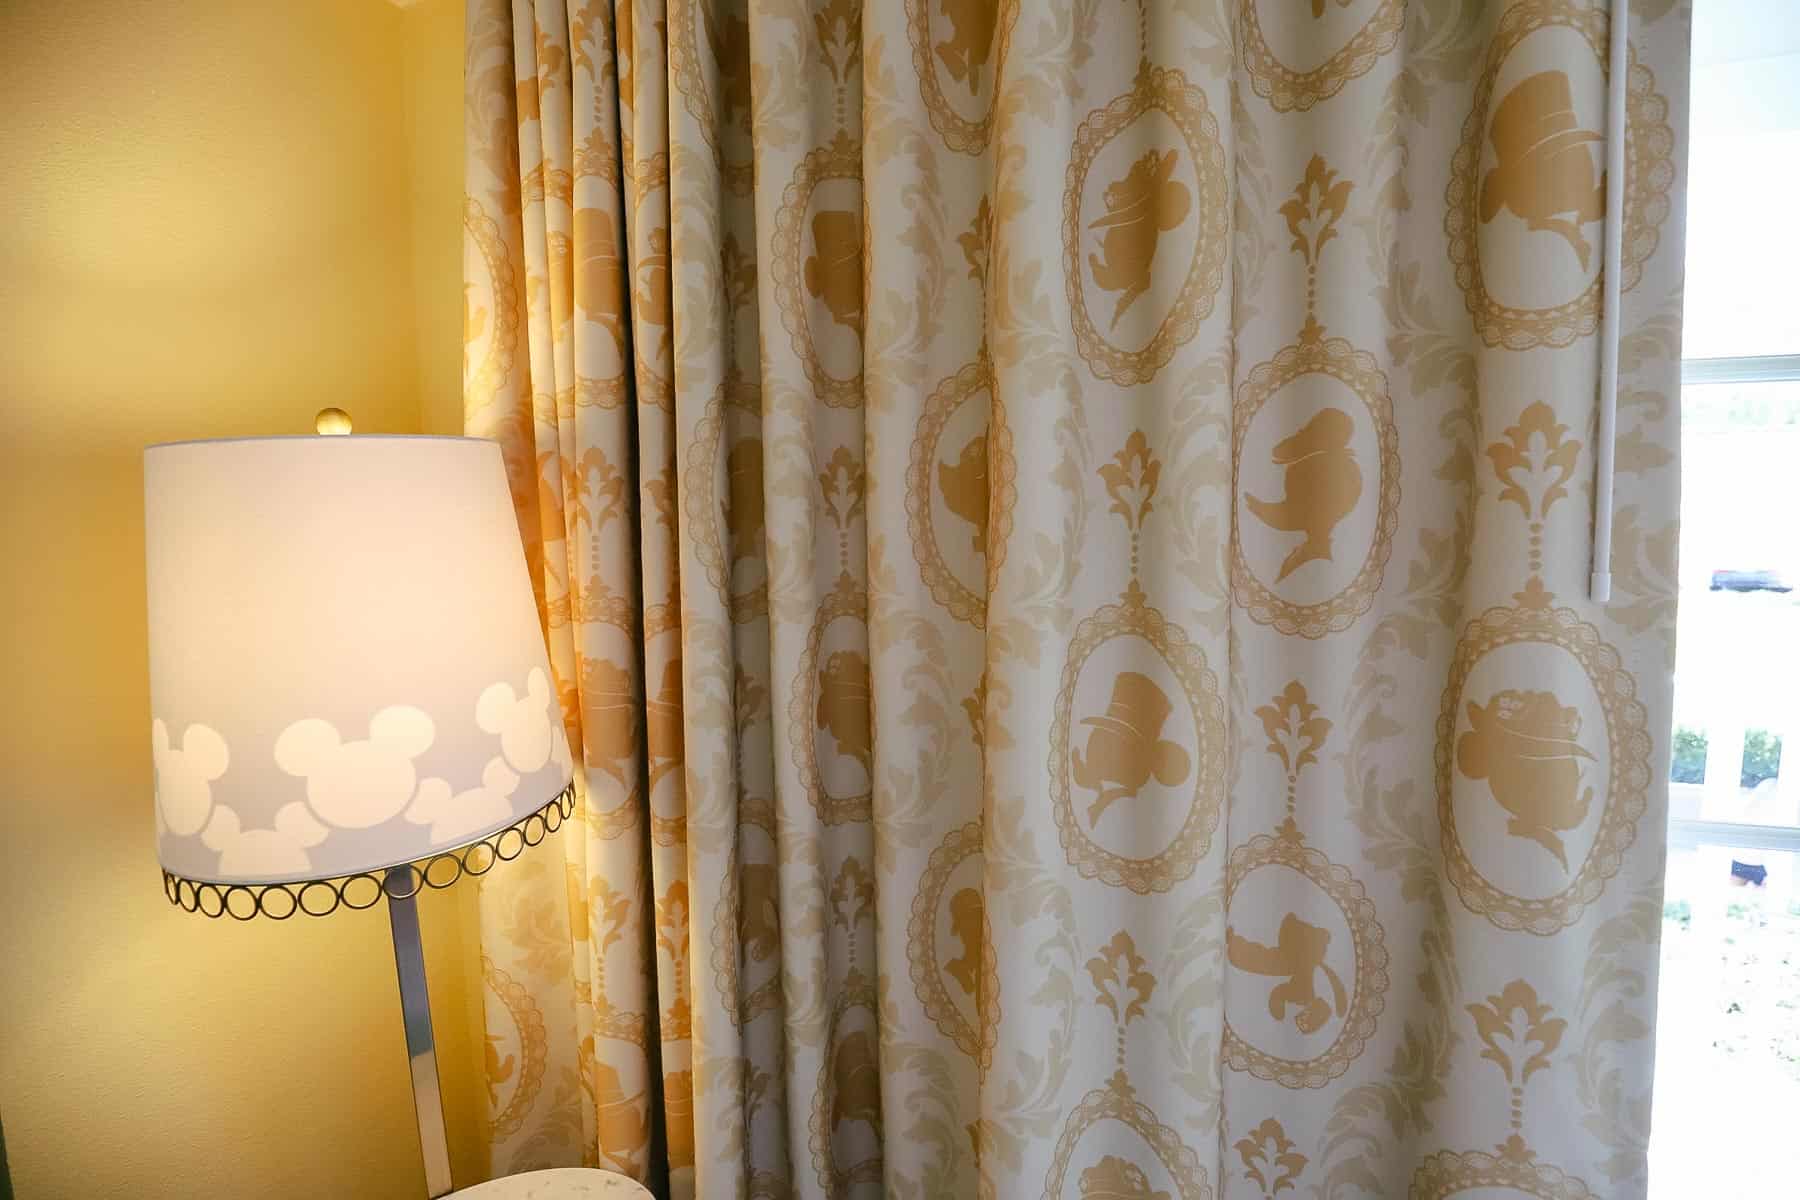 lampshade and curtains in the new room at Disney's Boardwalk 